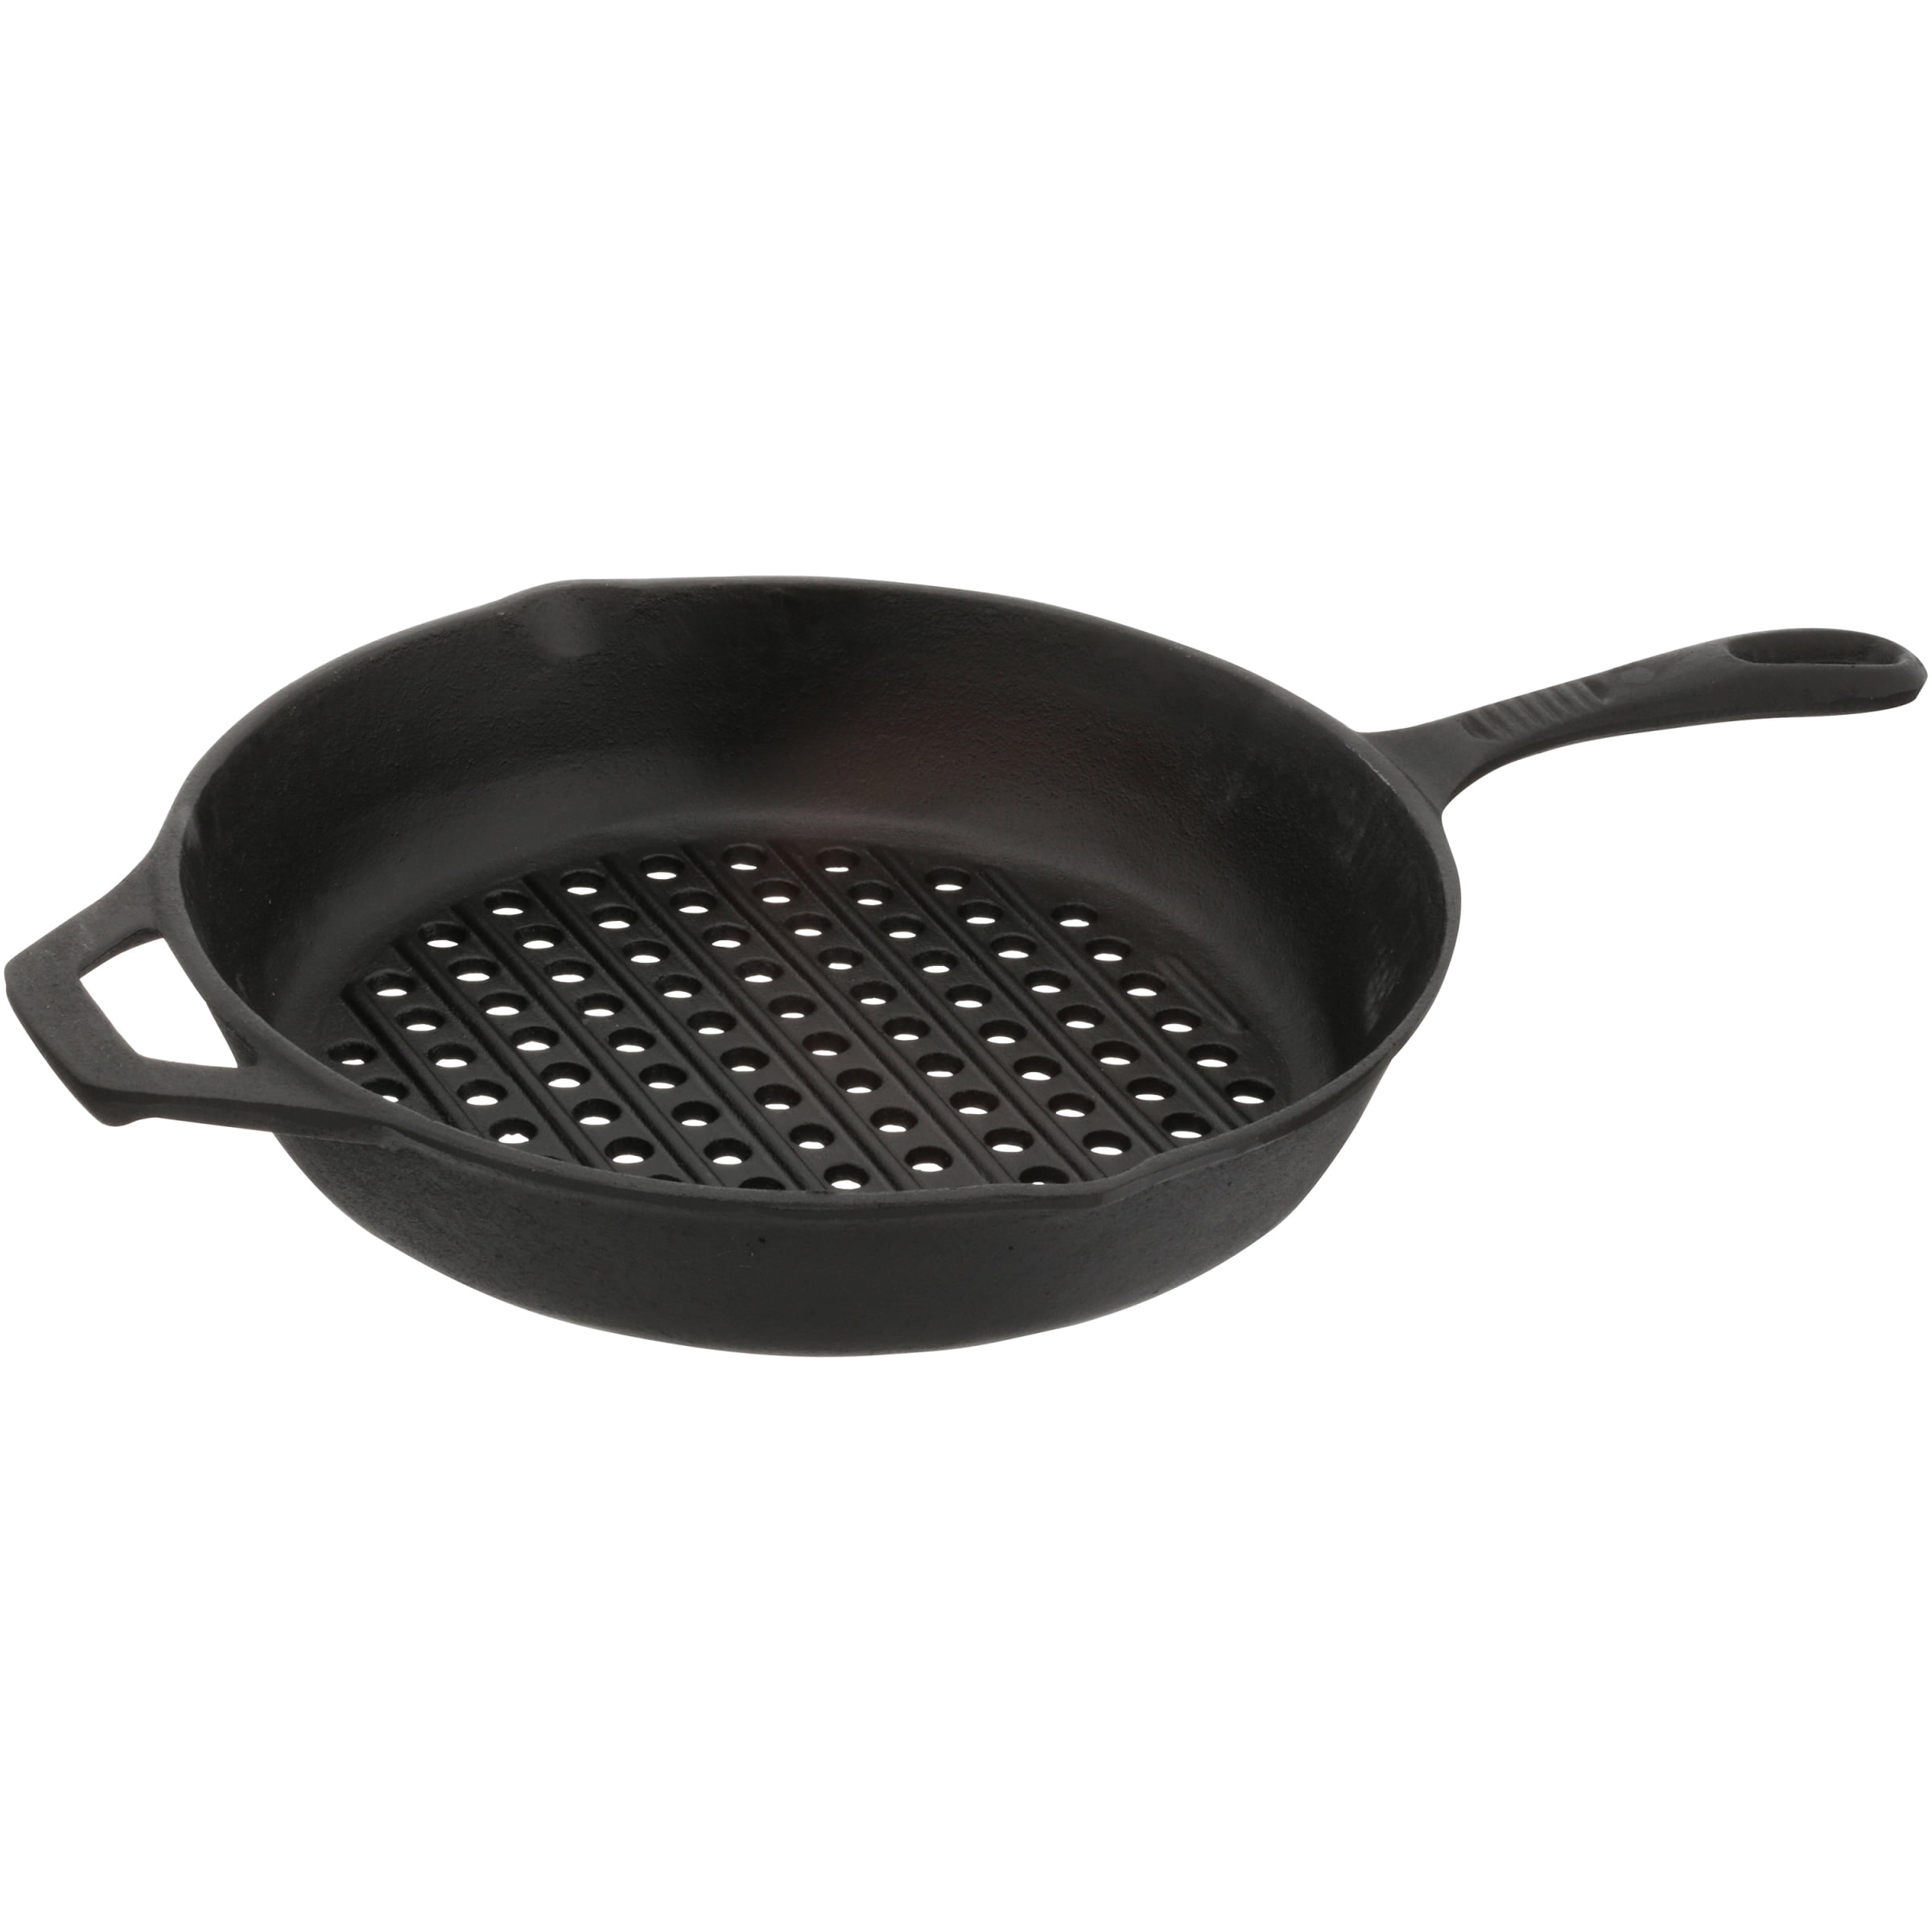  Mr. Bar-B-Q 06750X Heavy Duty Non-Stick Grilling Skillet, Rust  Resistant Grill Pan with Handles, Easy to Use Grilling Accessories, Non-Stick Surface